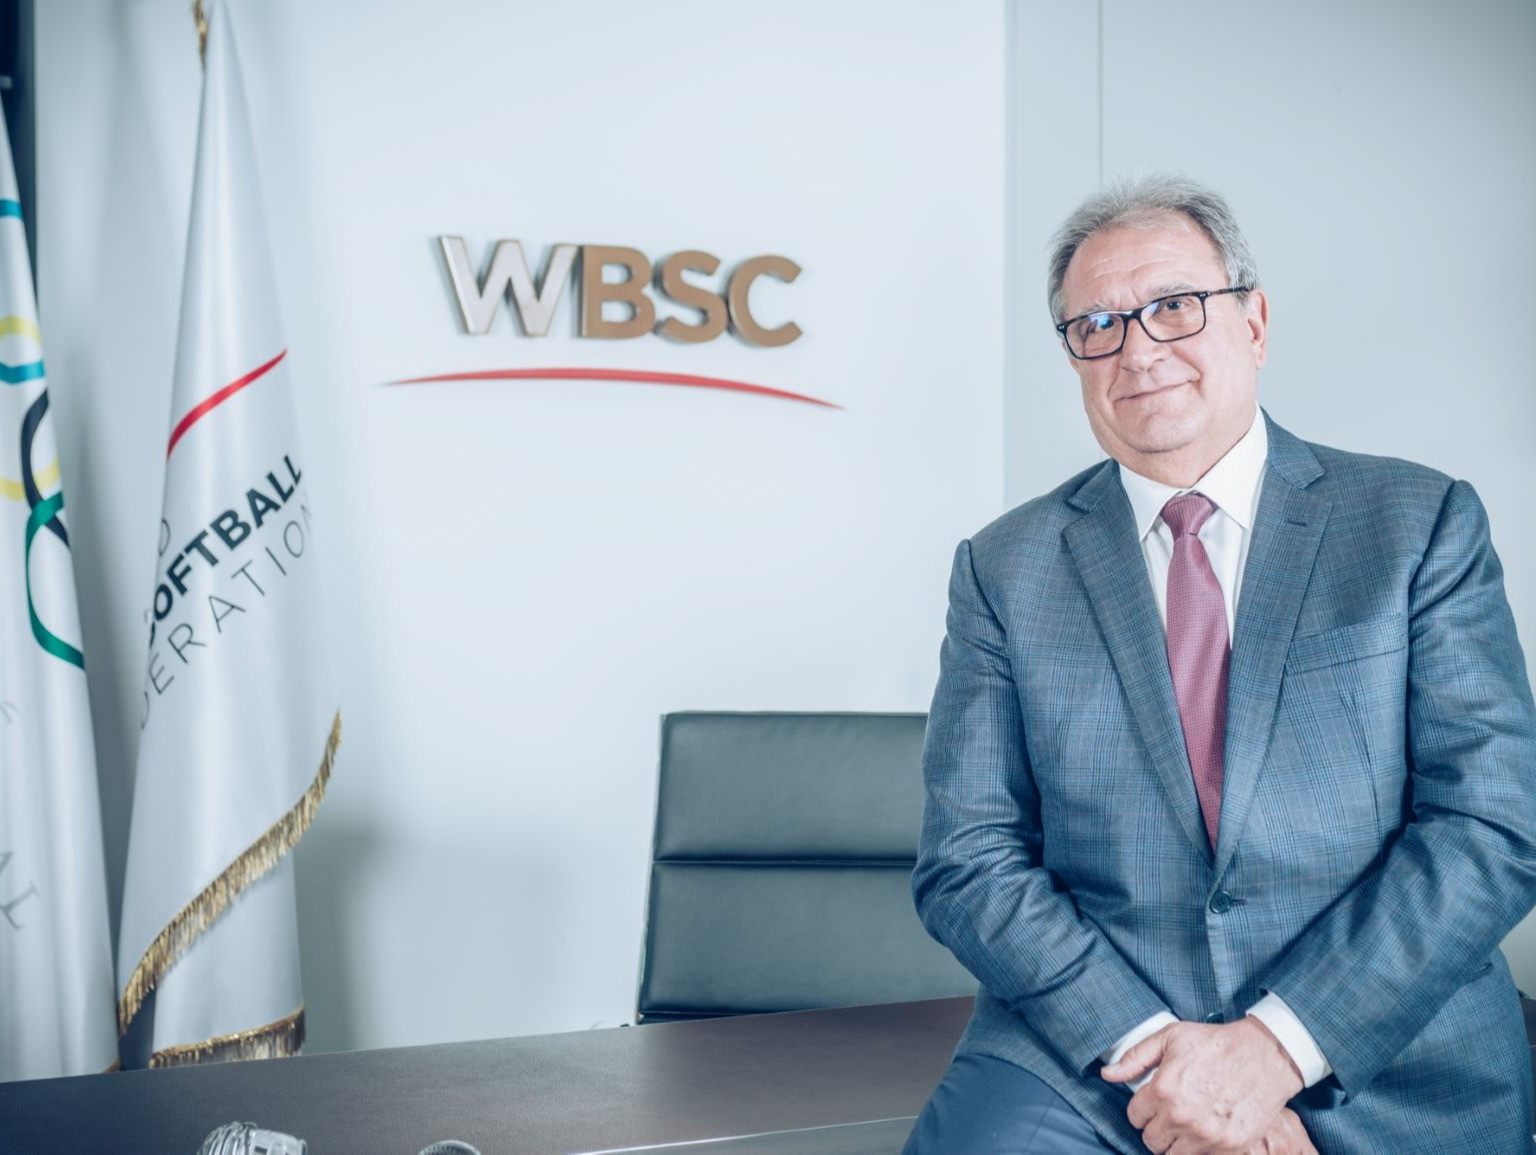 WBSC President hails 2019 as biggest year in history of international baseball and softball